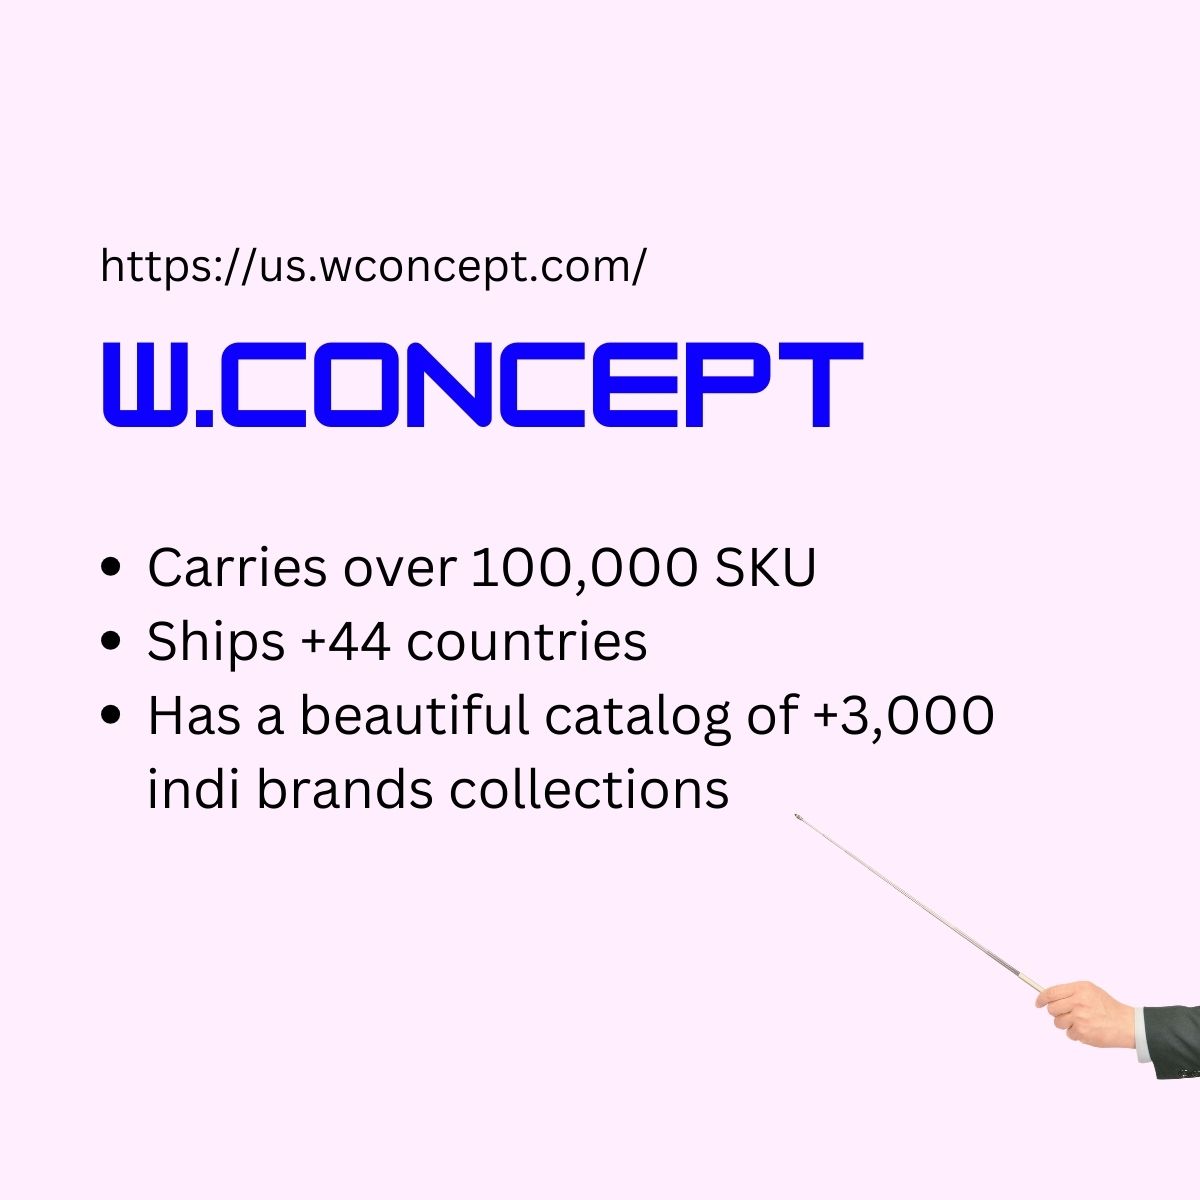 Who is Wconcept?